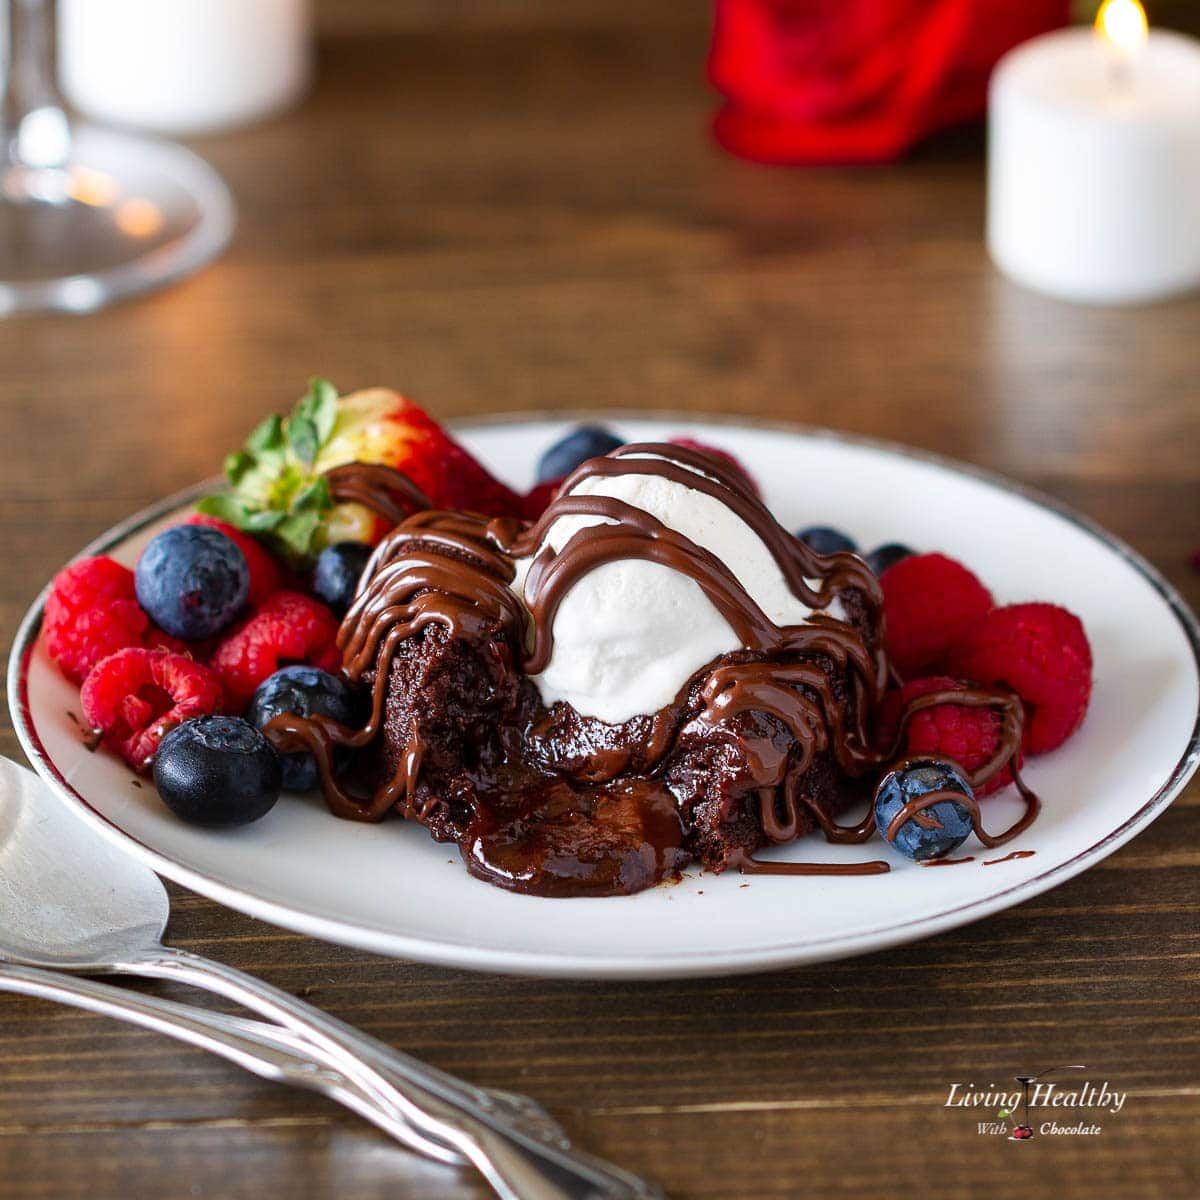 lava cake oozing with melted chocolate in the center topped with ice cream, berries and chocolate drizzle 